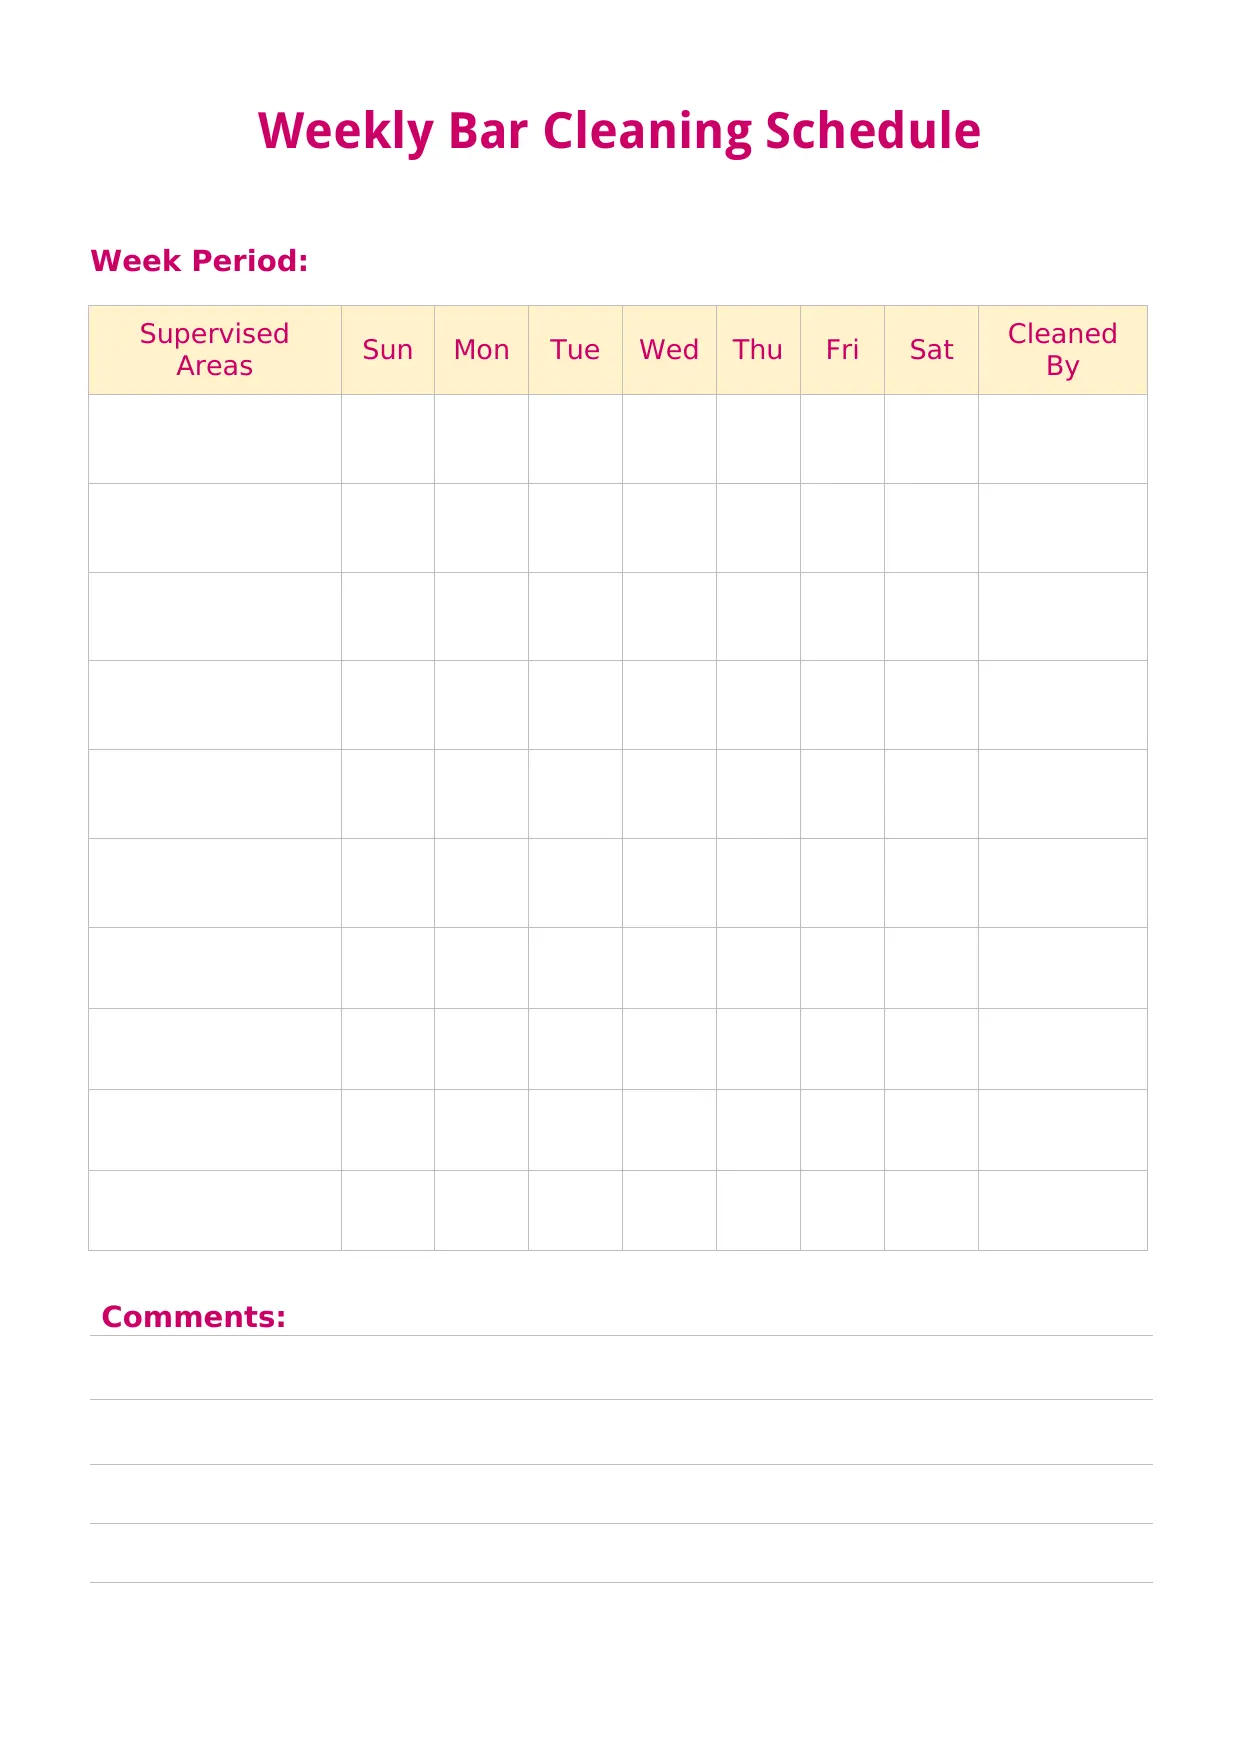 Weekly Bar Cleaning Schedule Template, bar cleaning checklist template word, bar cleaning checklist template free